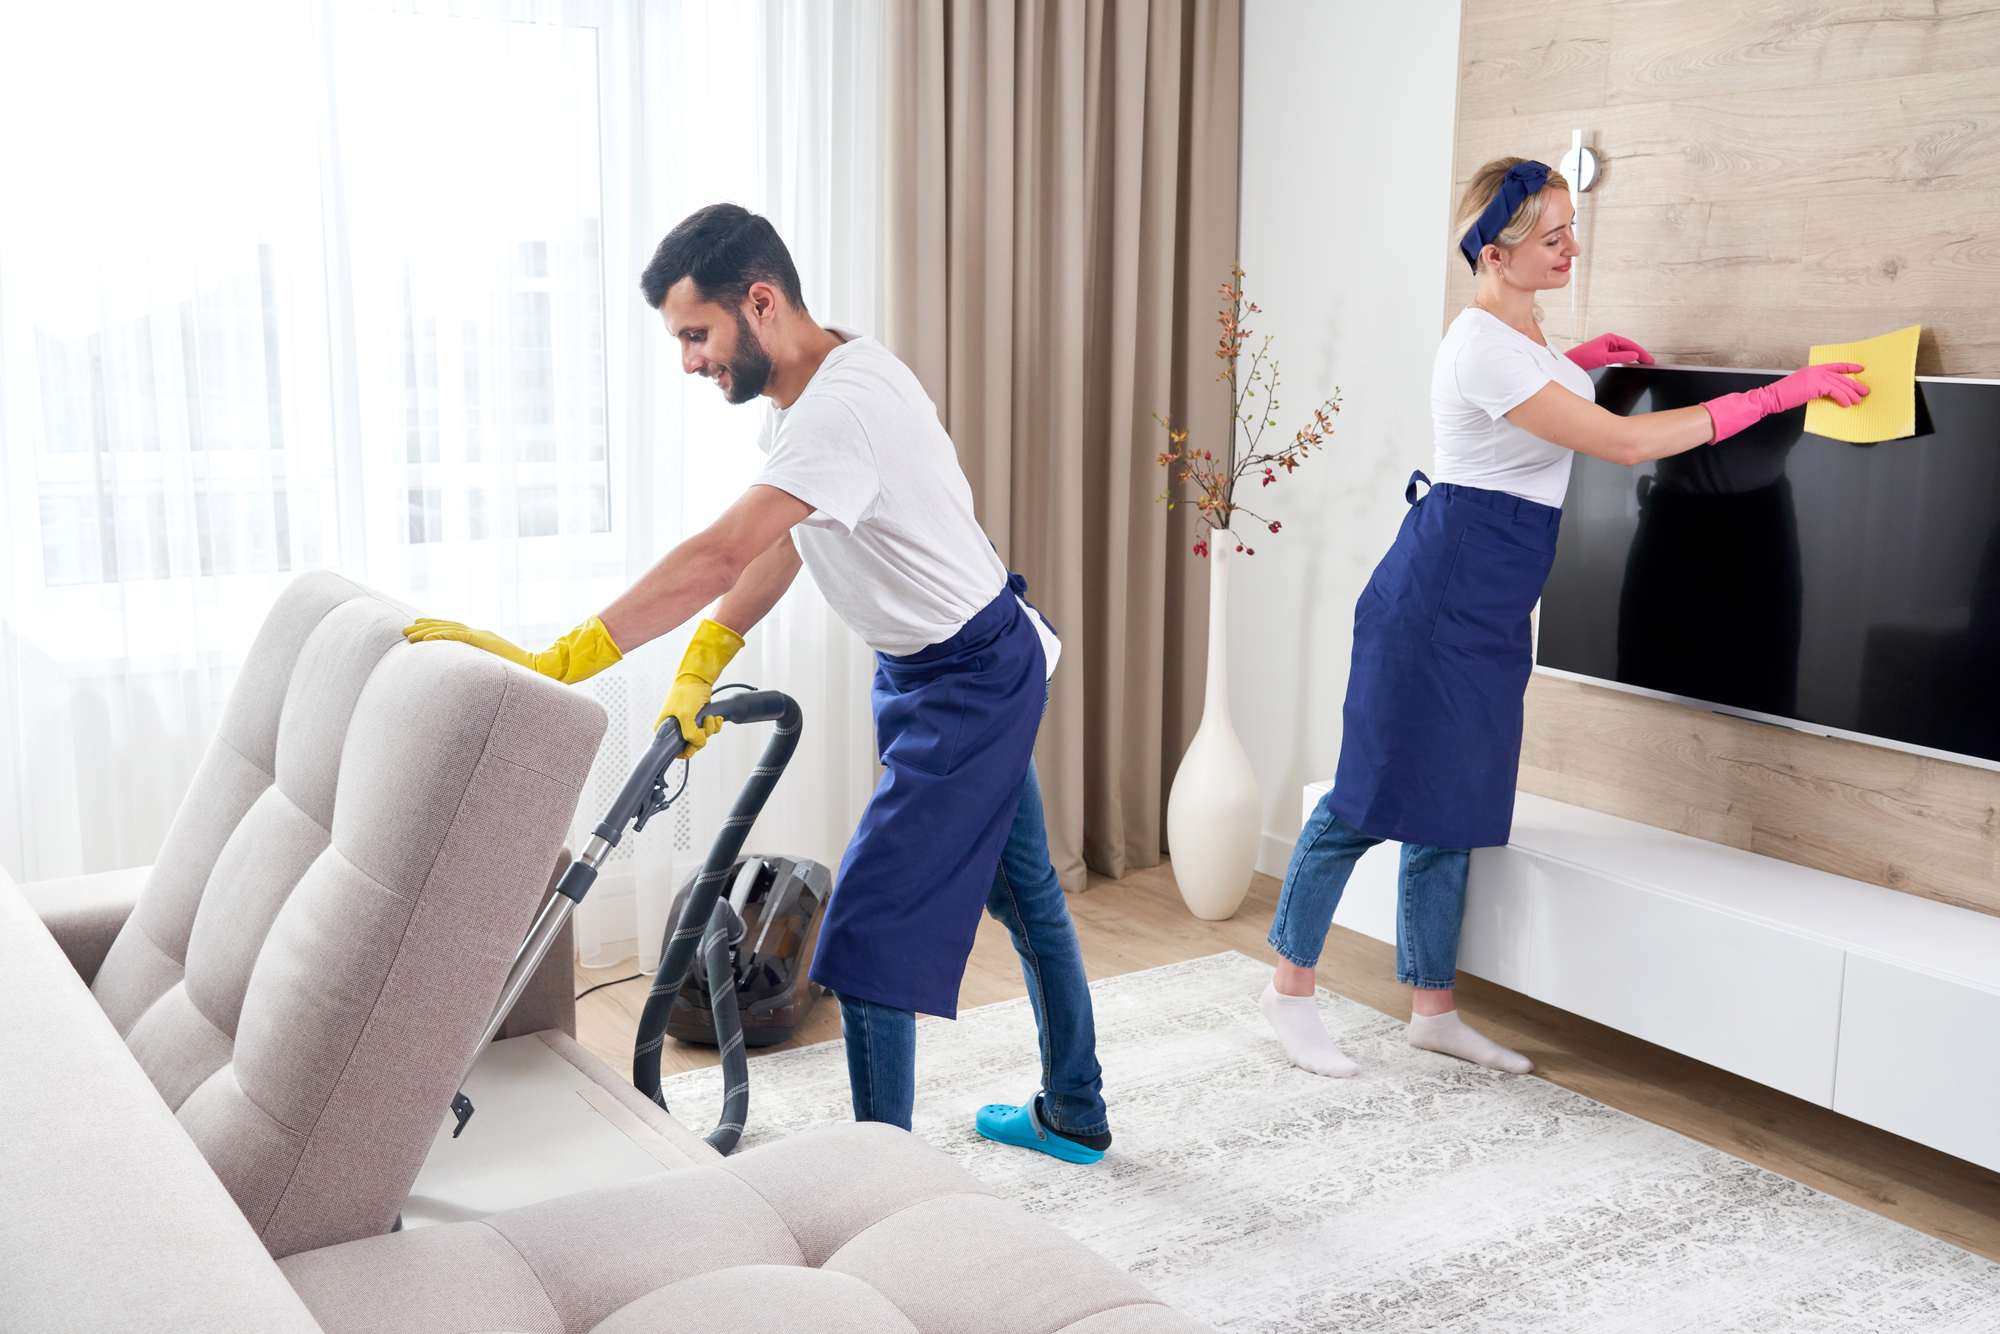 Professional cleaners cleaning living room of a small rental property